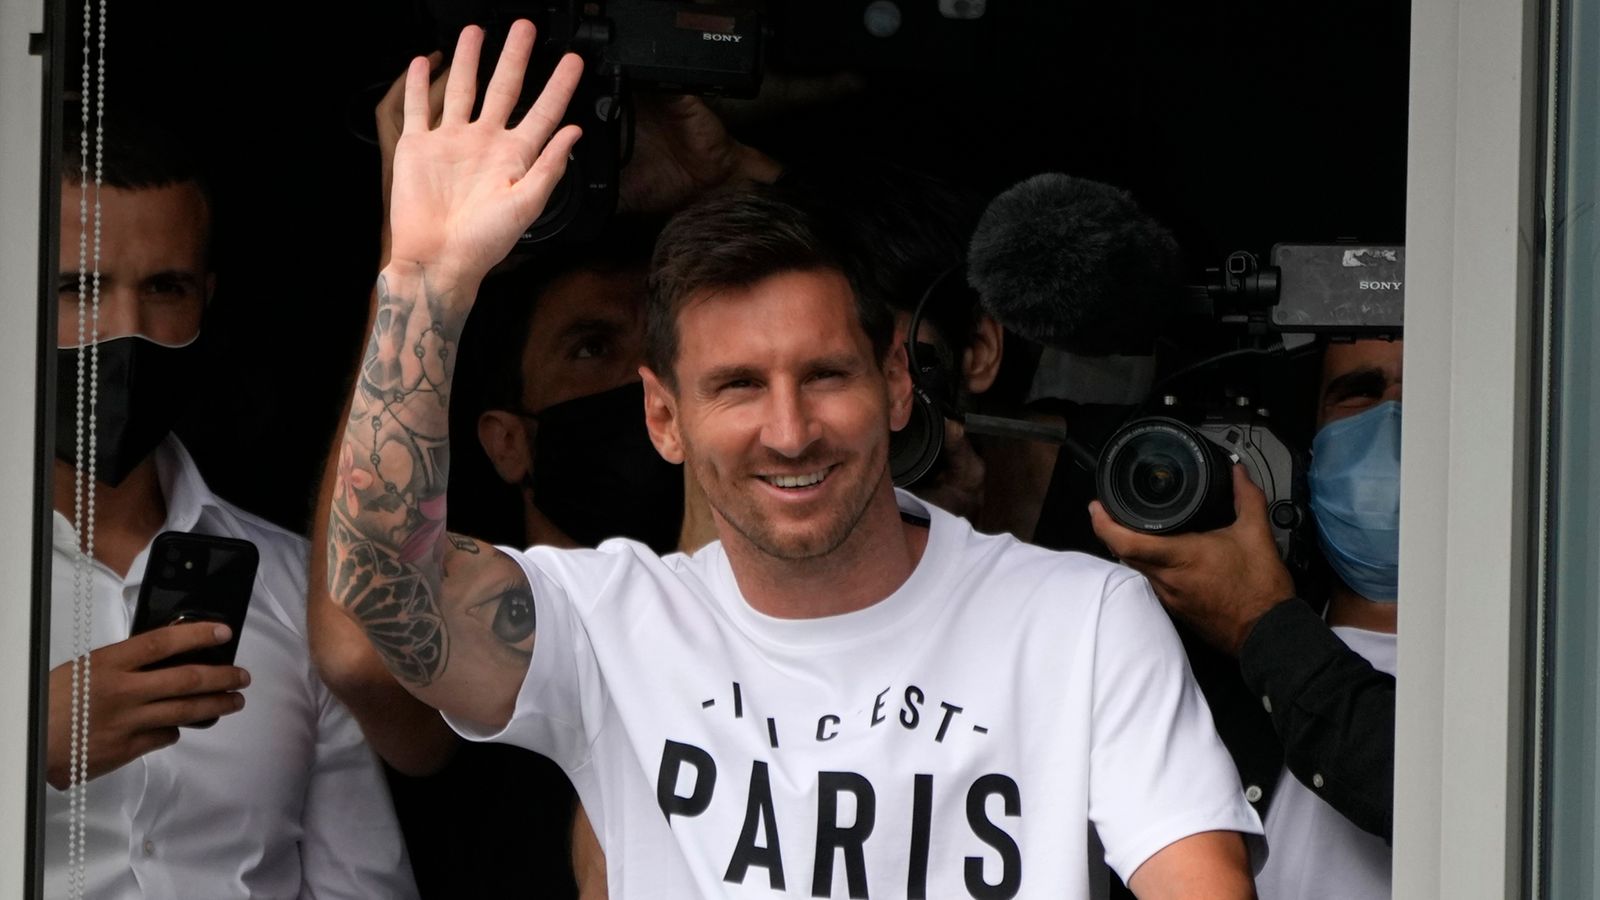 Lionel Messi Passes Paris Saint Germain Medical Ahead Of Joining On Two Year Contract After Leaving Barcelona